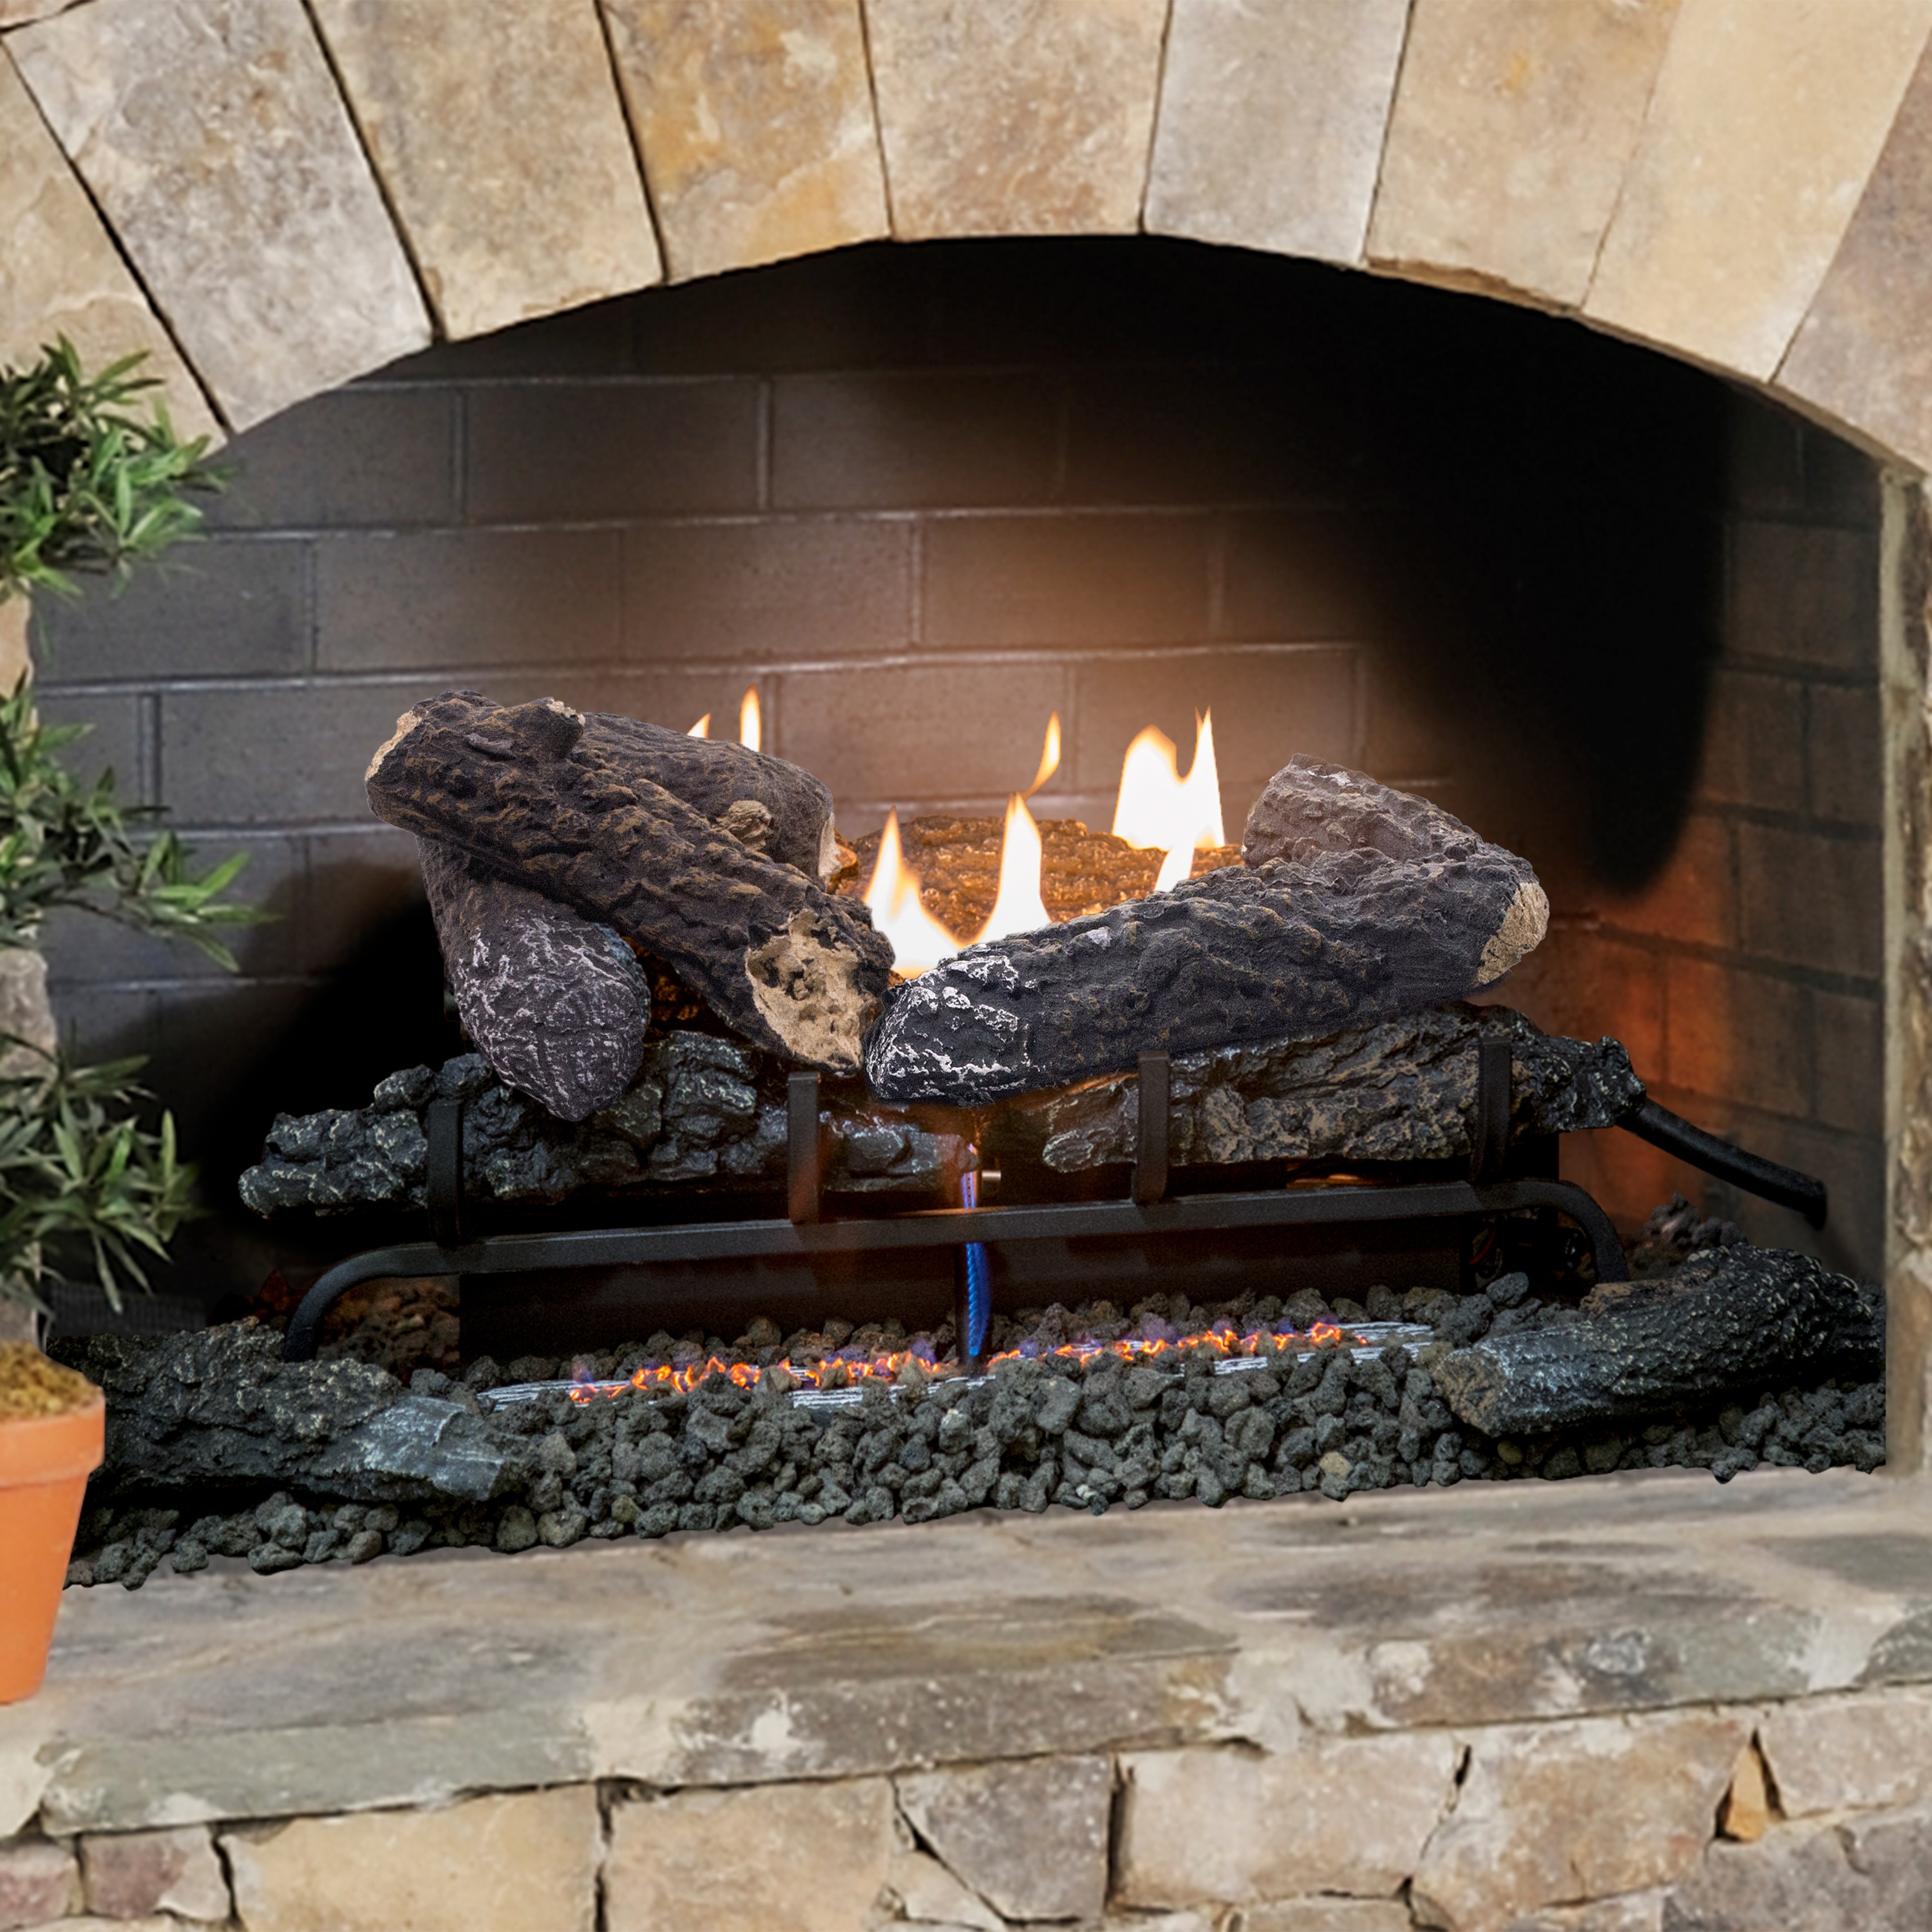 Glowing Fireplace Embers GAS Fireplace Glowing Embers, Rock Wool for Vent Free or Vented GAS Log Sets, Inserts and Fireplaces. Large Bag 4 oz